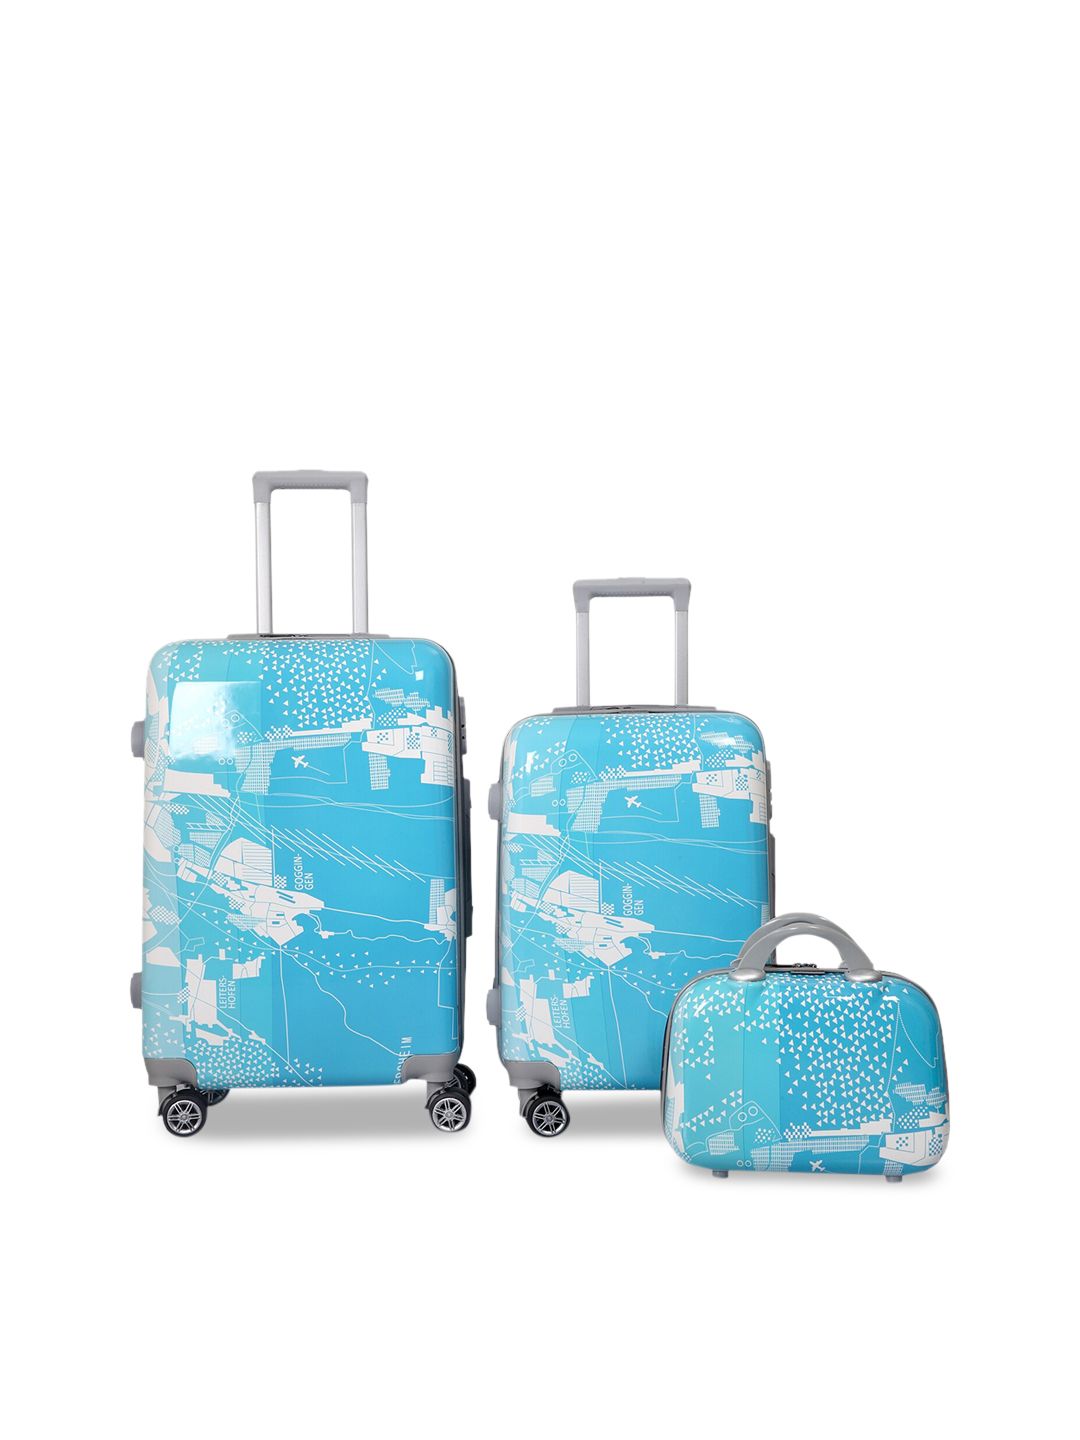 Polo Class Set Of 3 Hard Case Trolley Suitcases & Vanity Bag Price in India